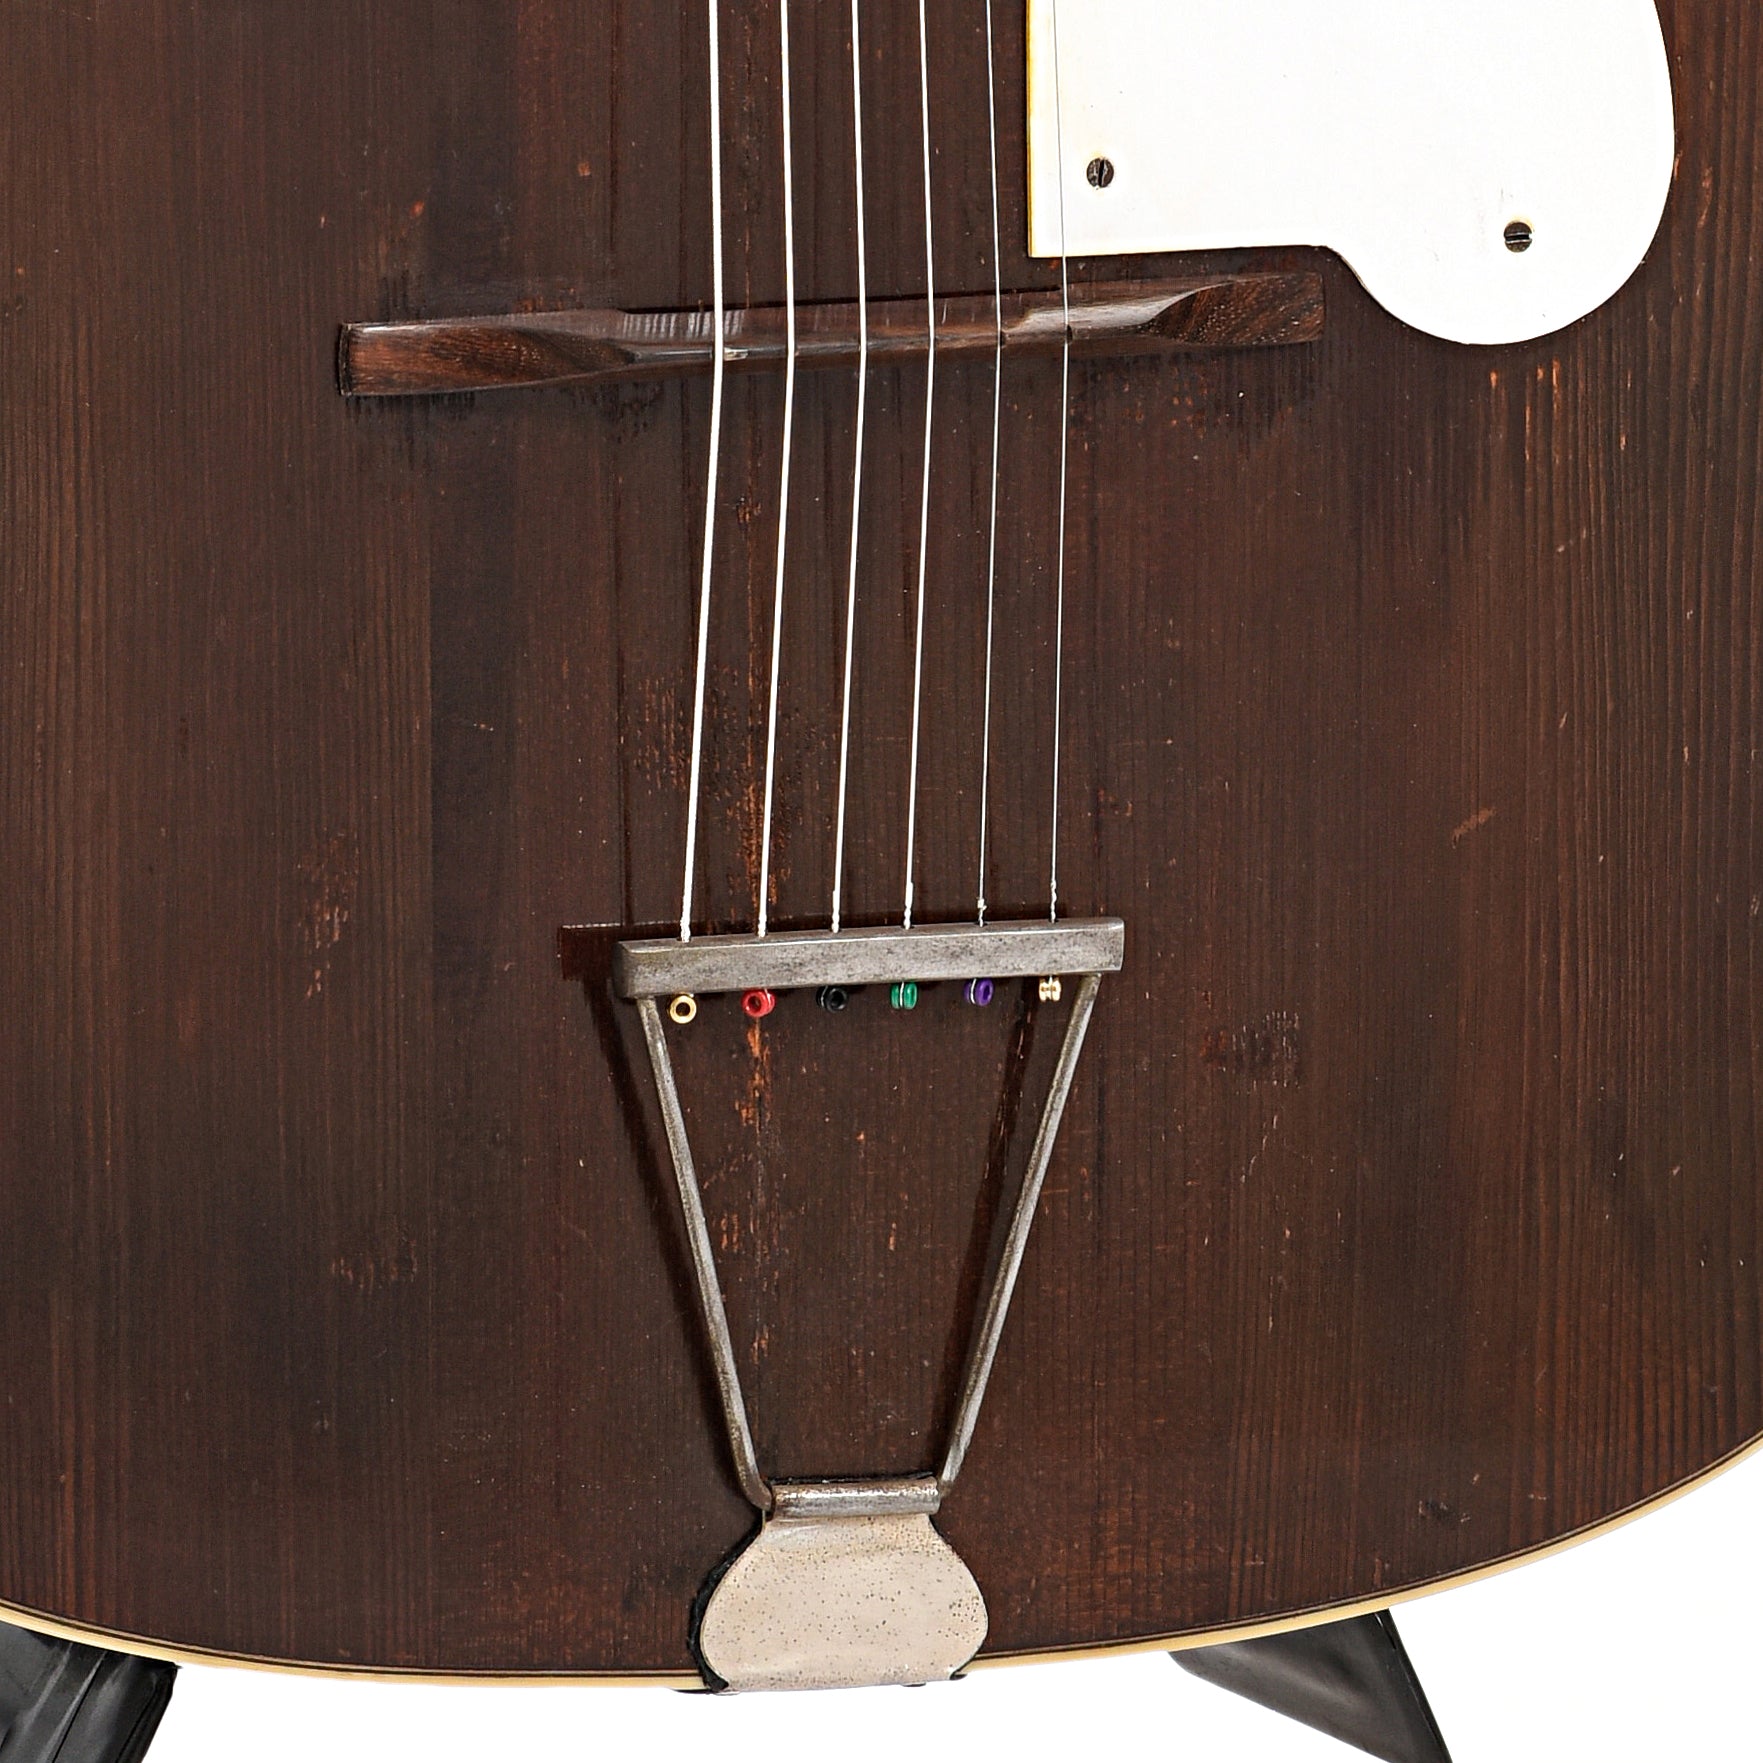 Tailpiece and bridge of Carbonell 25